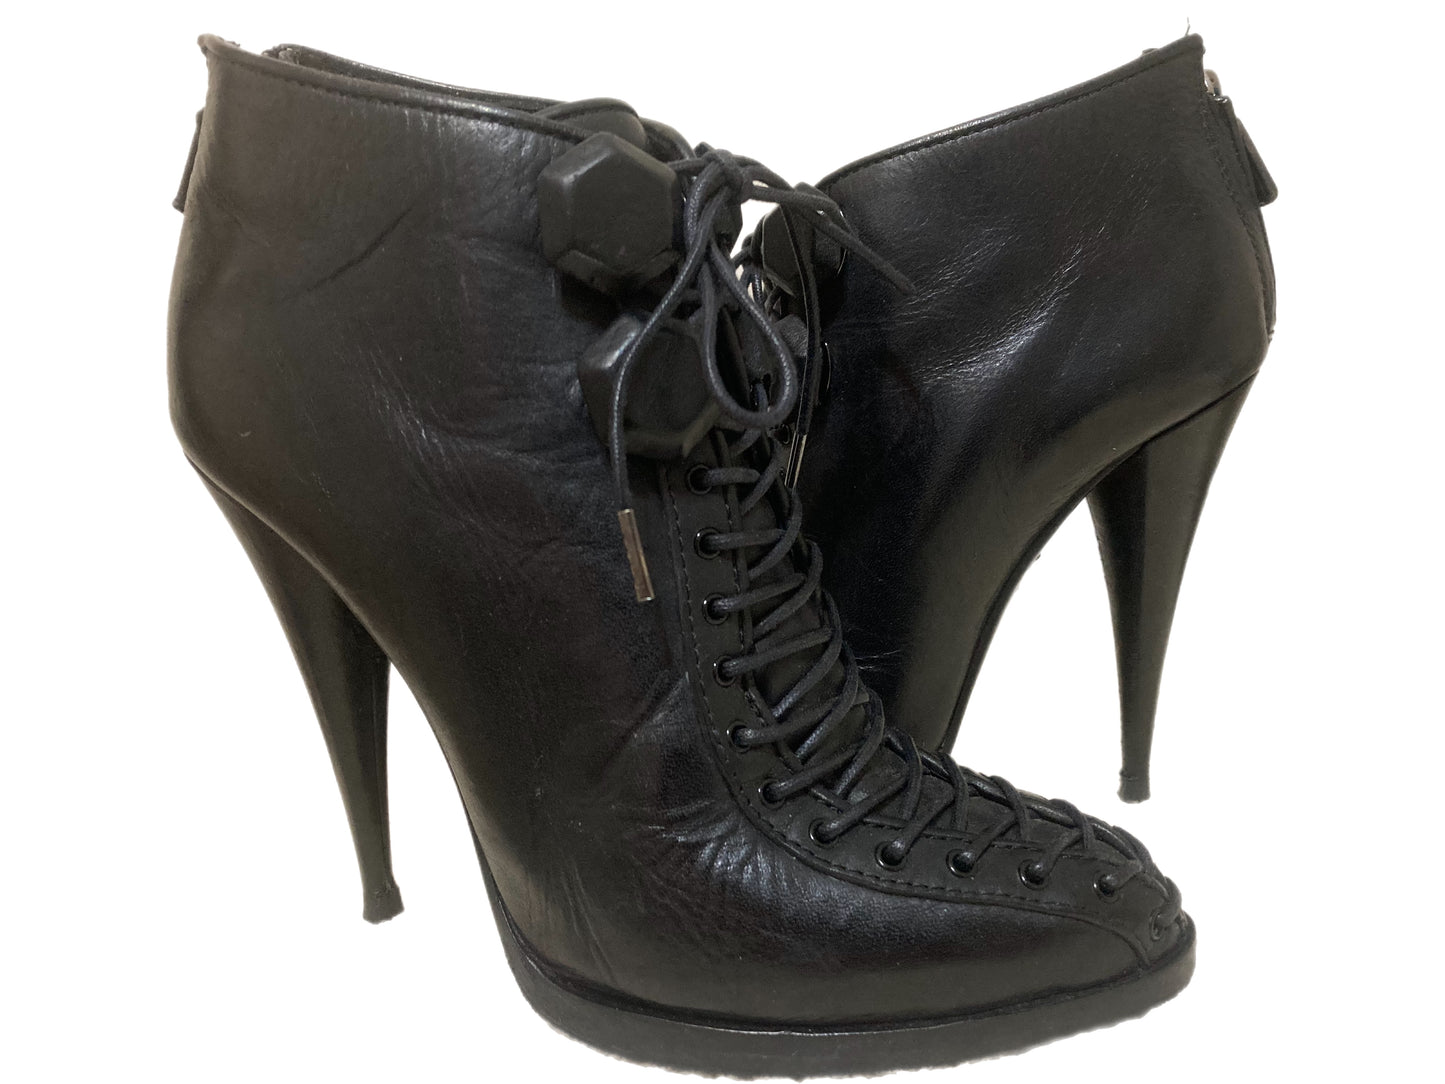 GIVENCHY Leather Lace-Up Ankle Booties Black Size 38